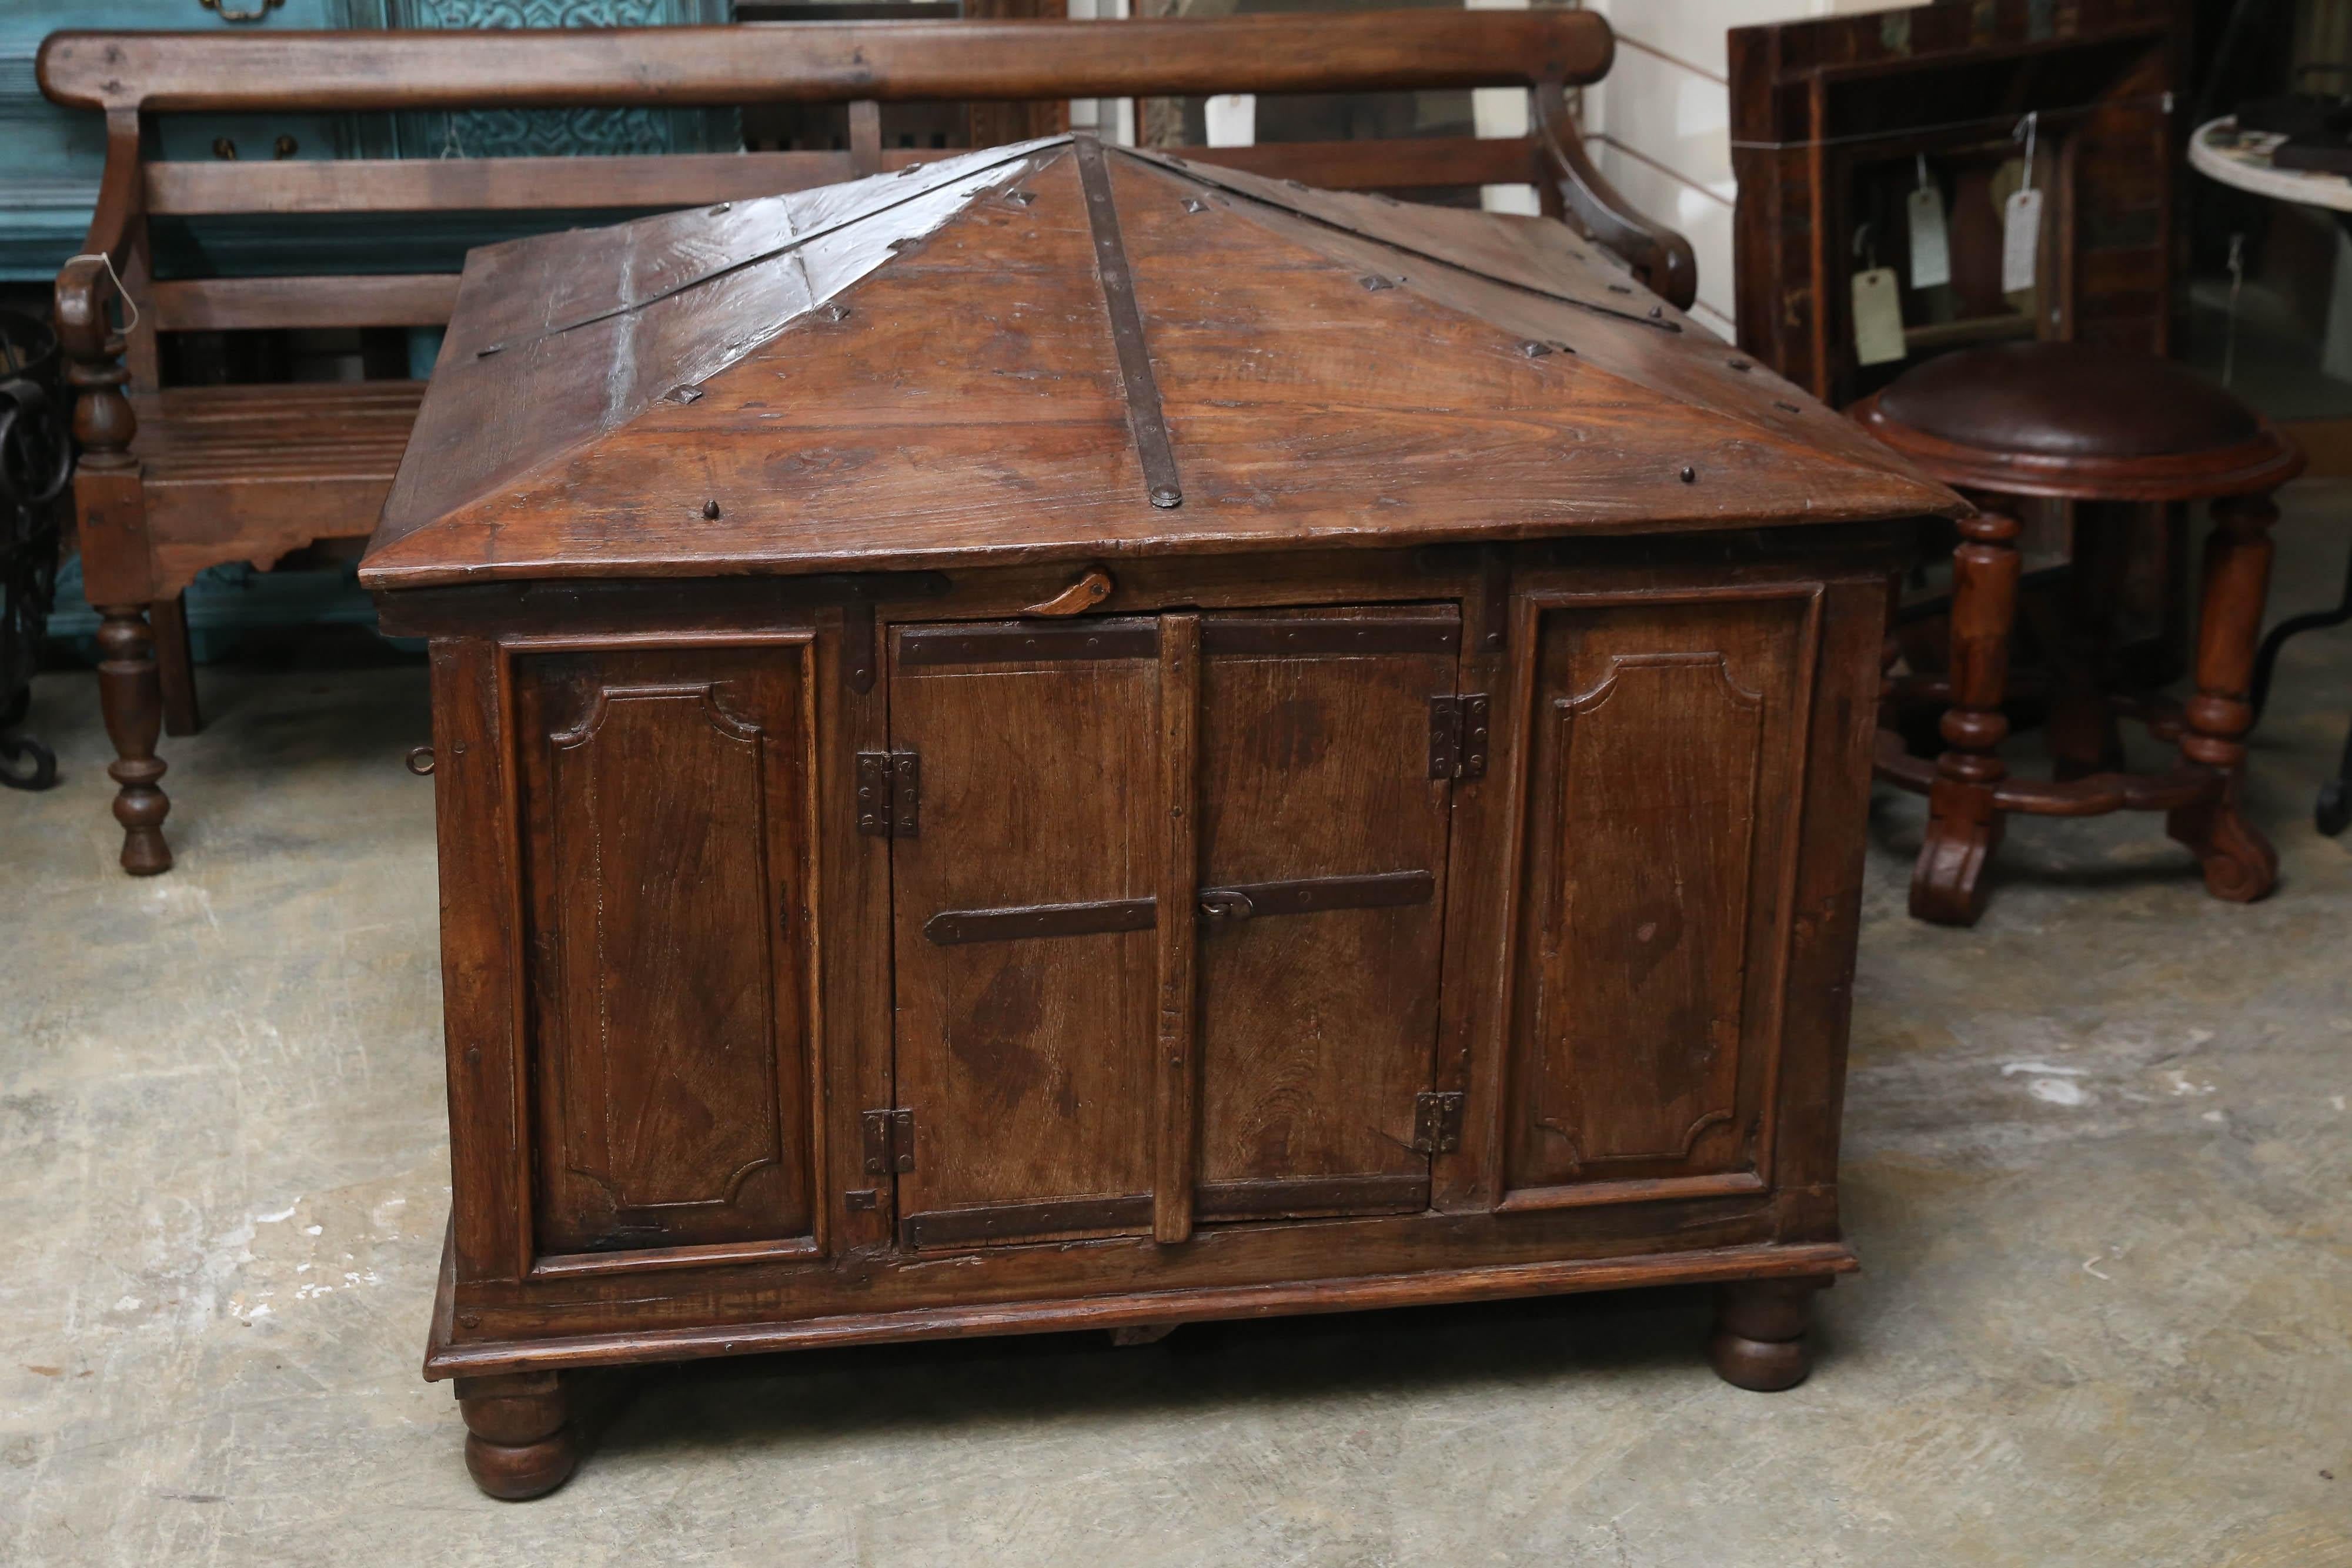 British Colonial Grand 1890s Reinforced Solid Teak Wood Dog House from a Settler's Home For Sale